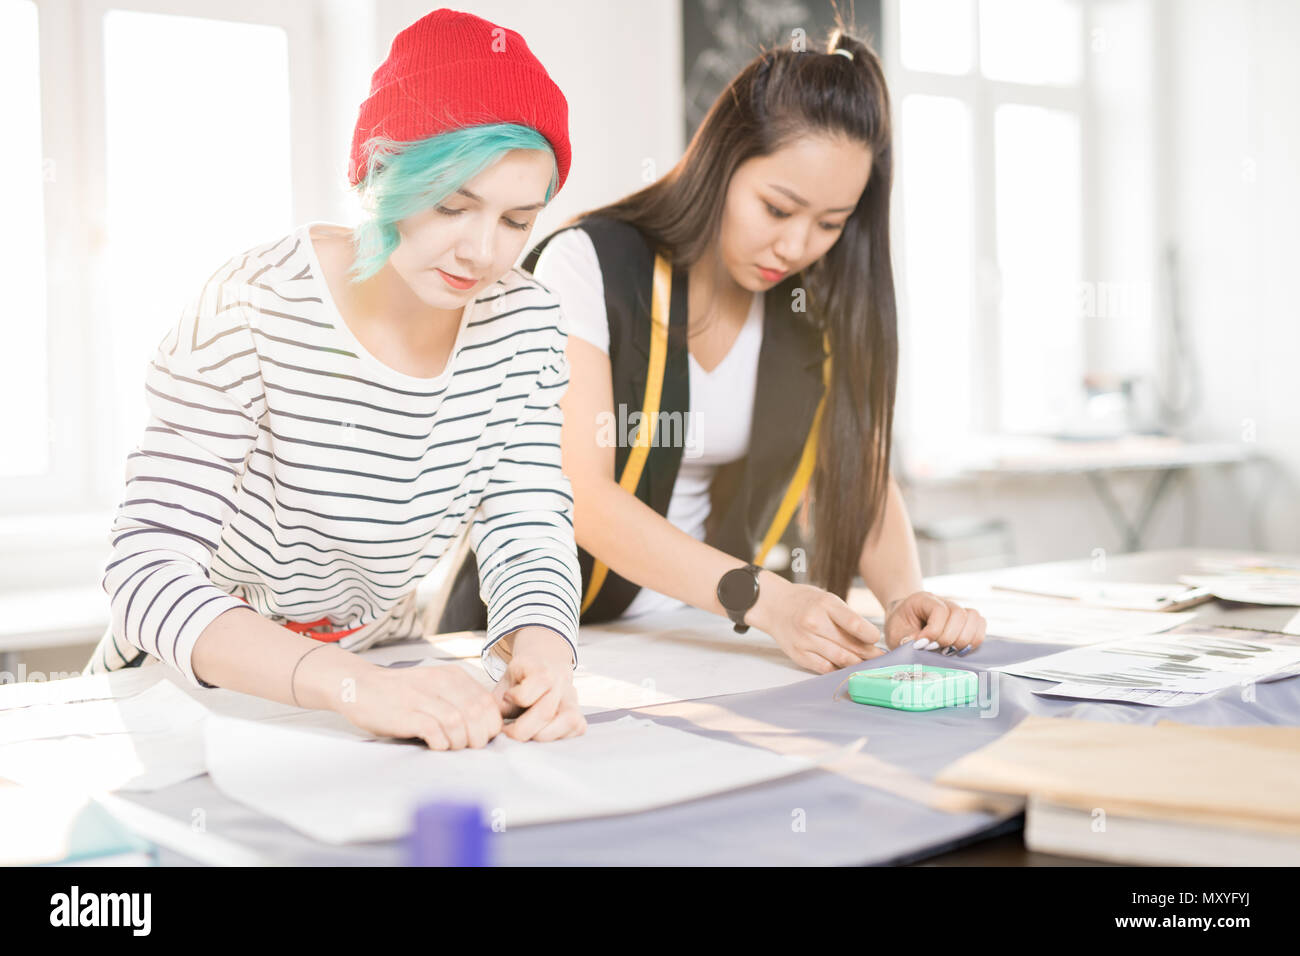 Portrait of two contemporary young women making patterns for custom made clothes on tailors table while collaborating on creative fashion design proje Stock Photo